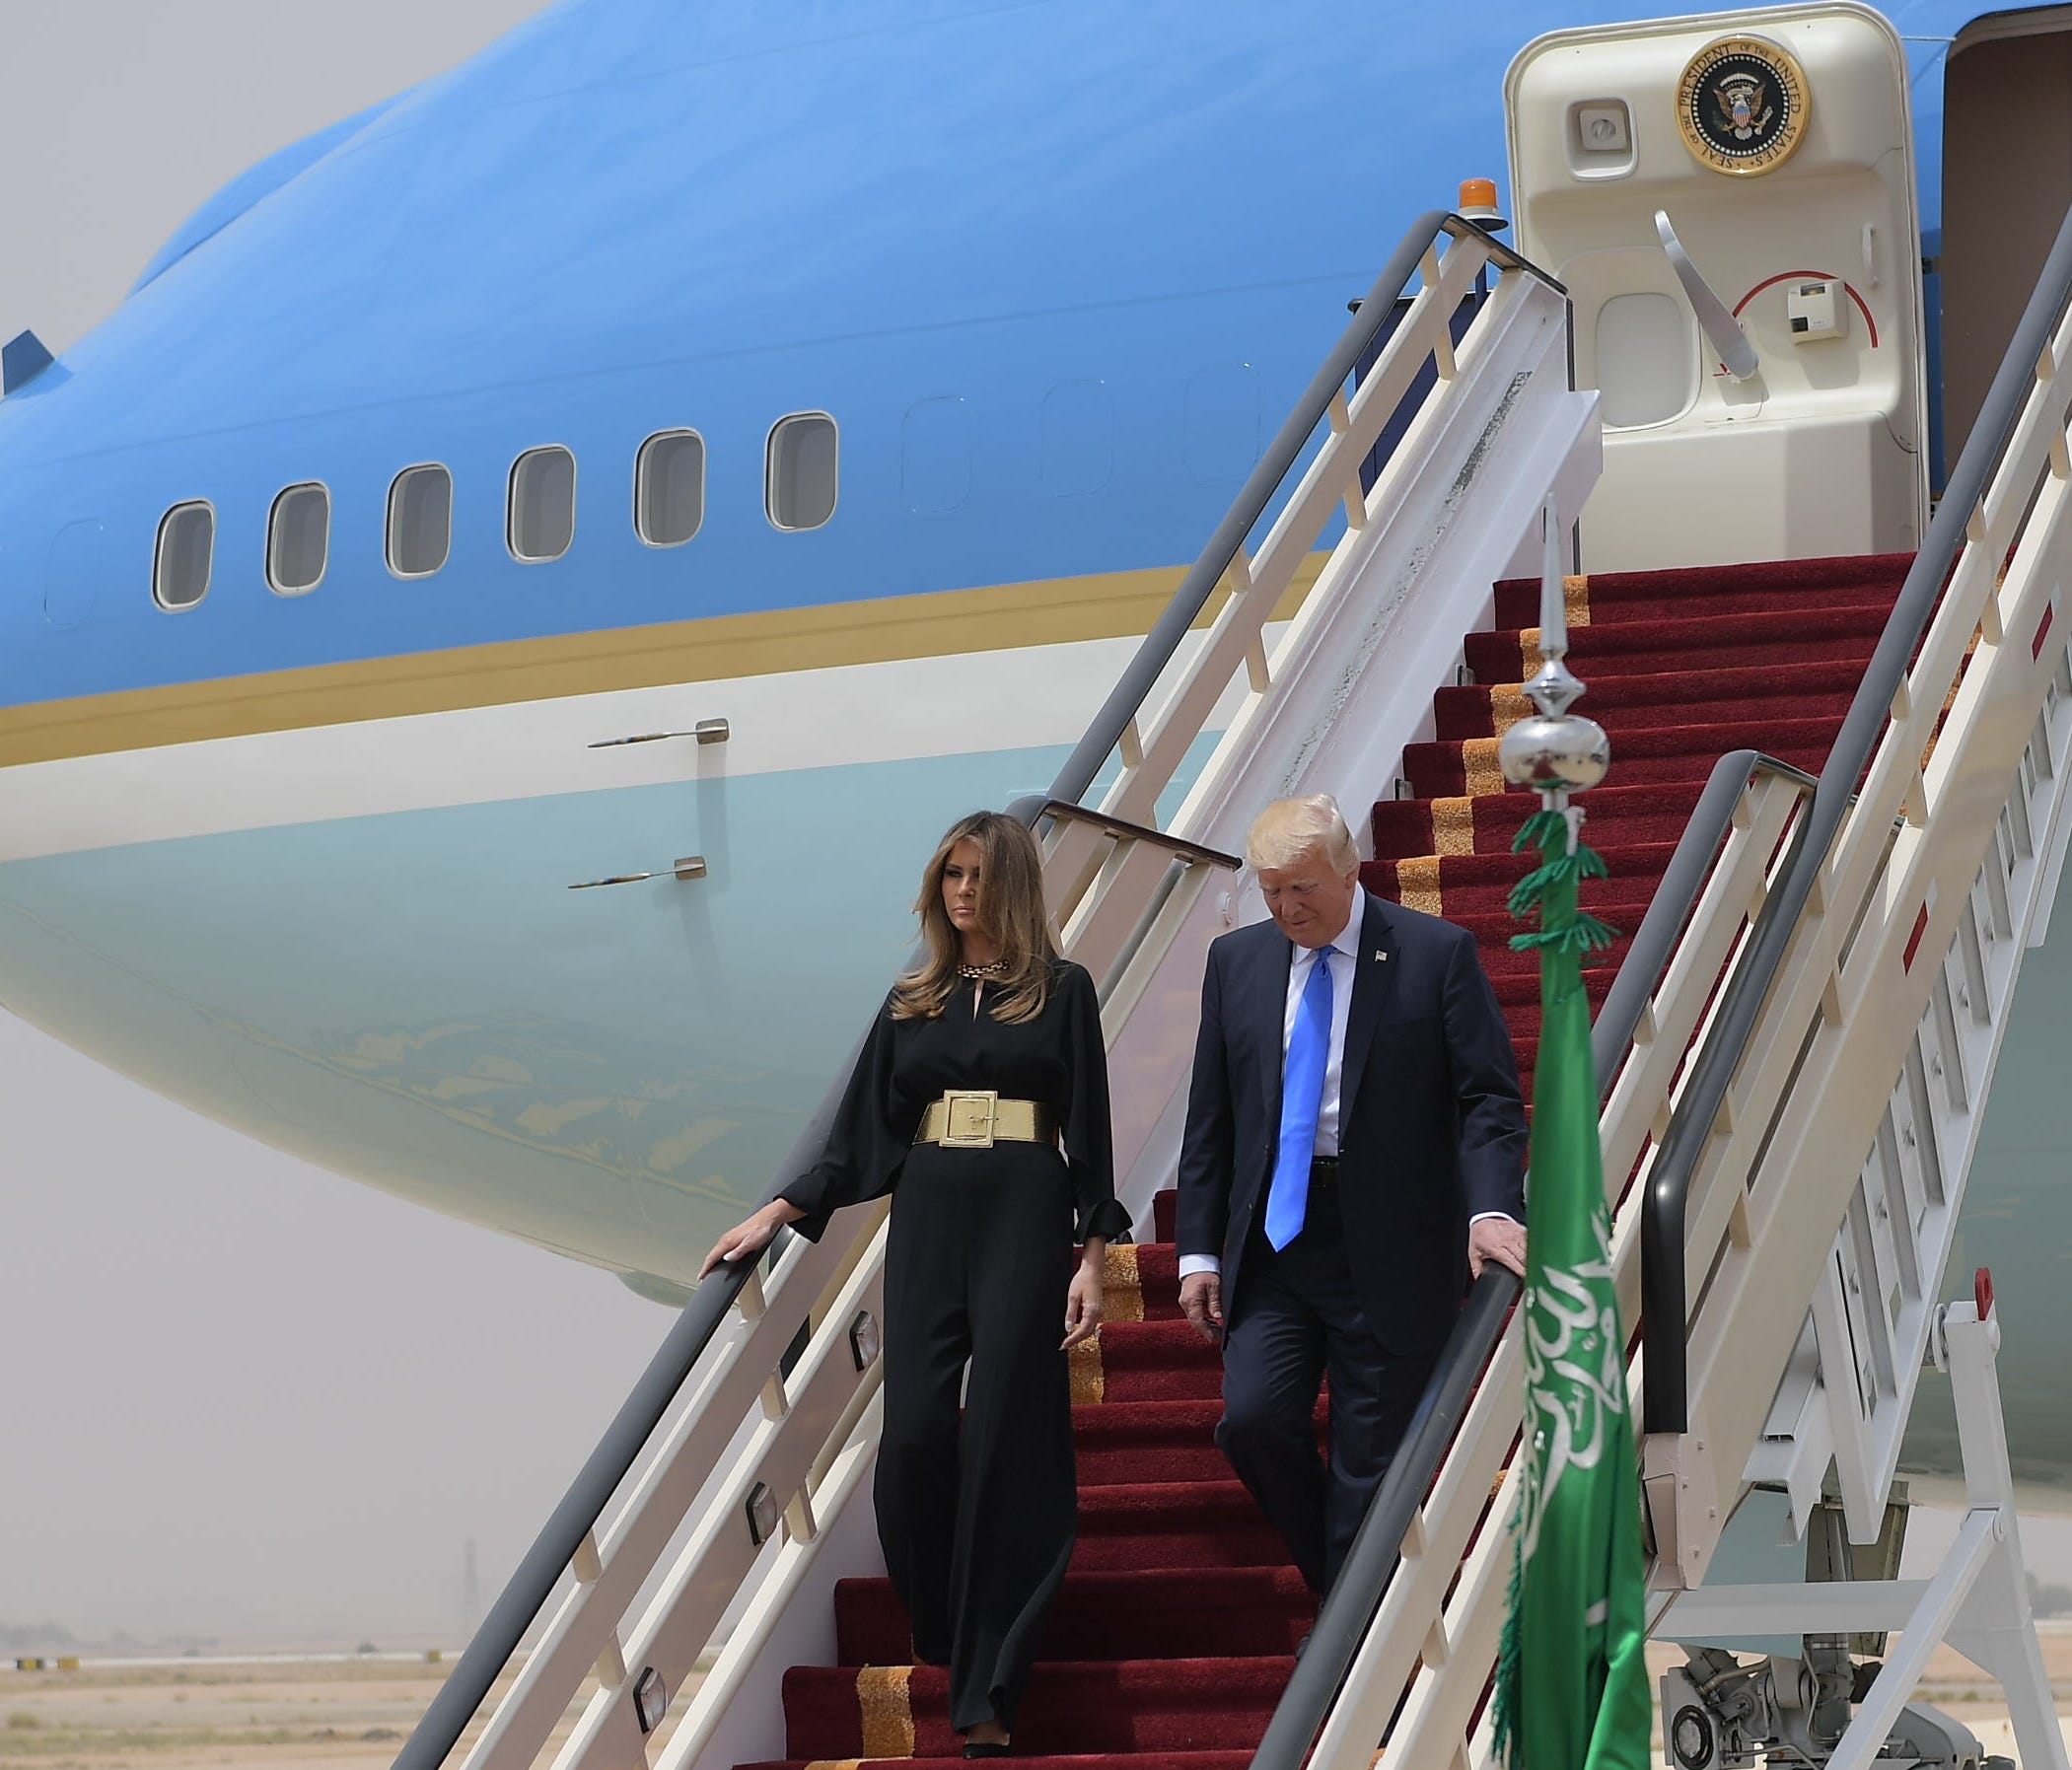 President Trump and First Lady Melania Trump step off Air Force One upon arrival at King Khalid International Airport in Riyadh on Saturday.